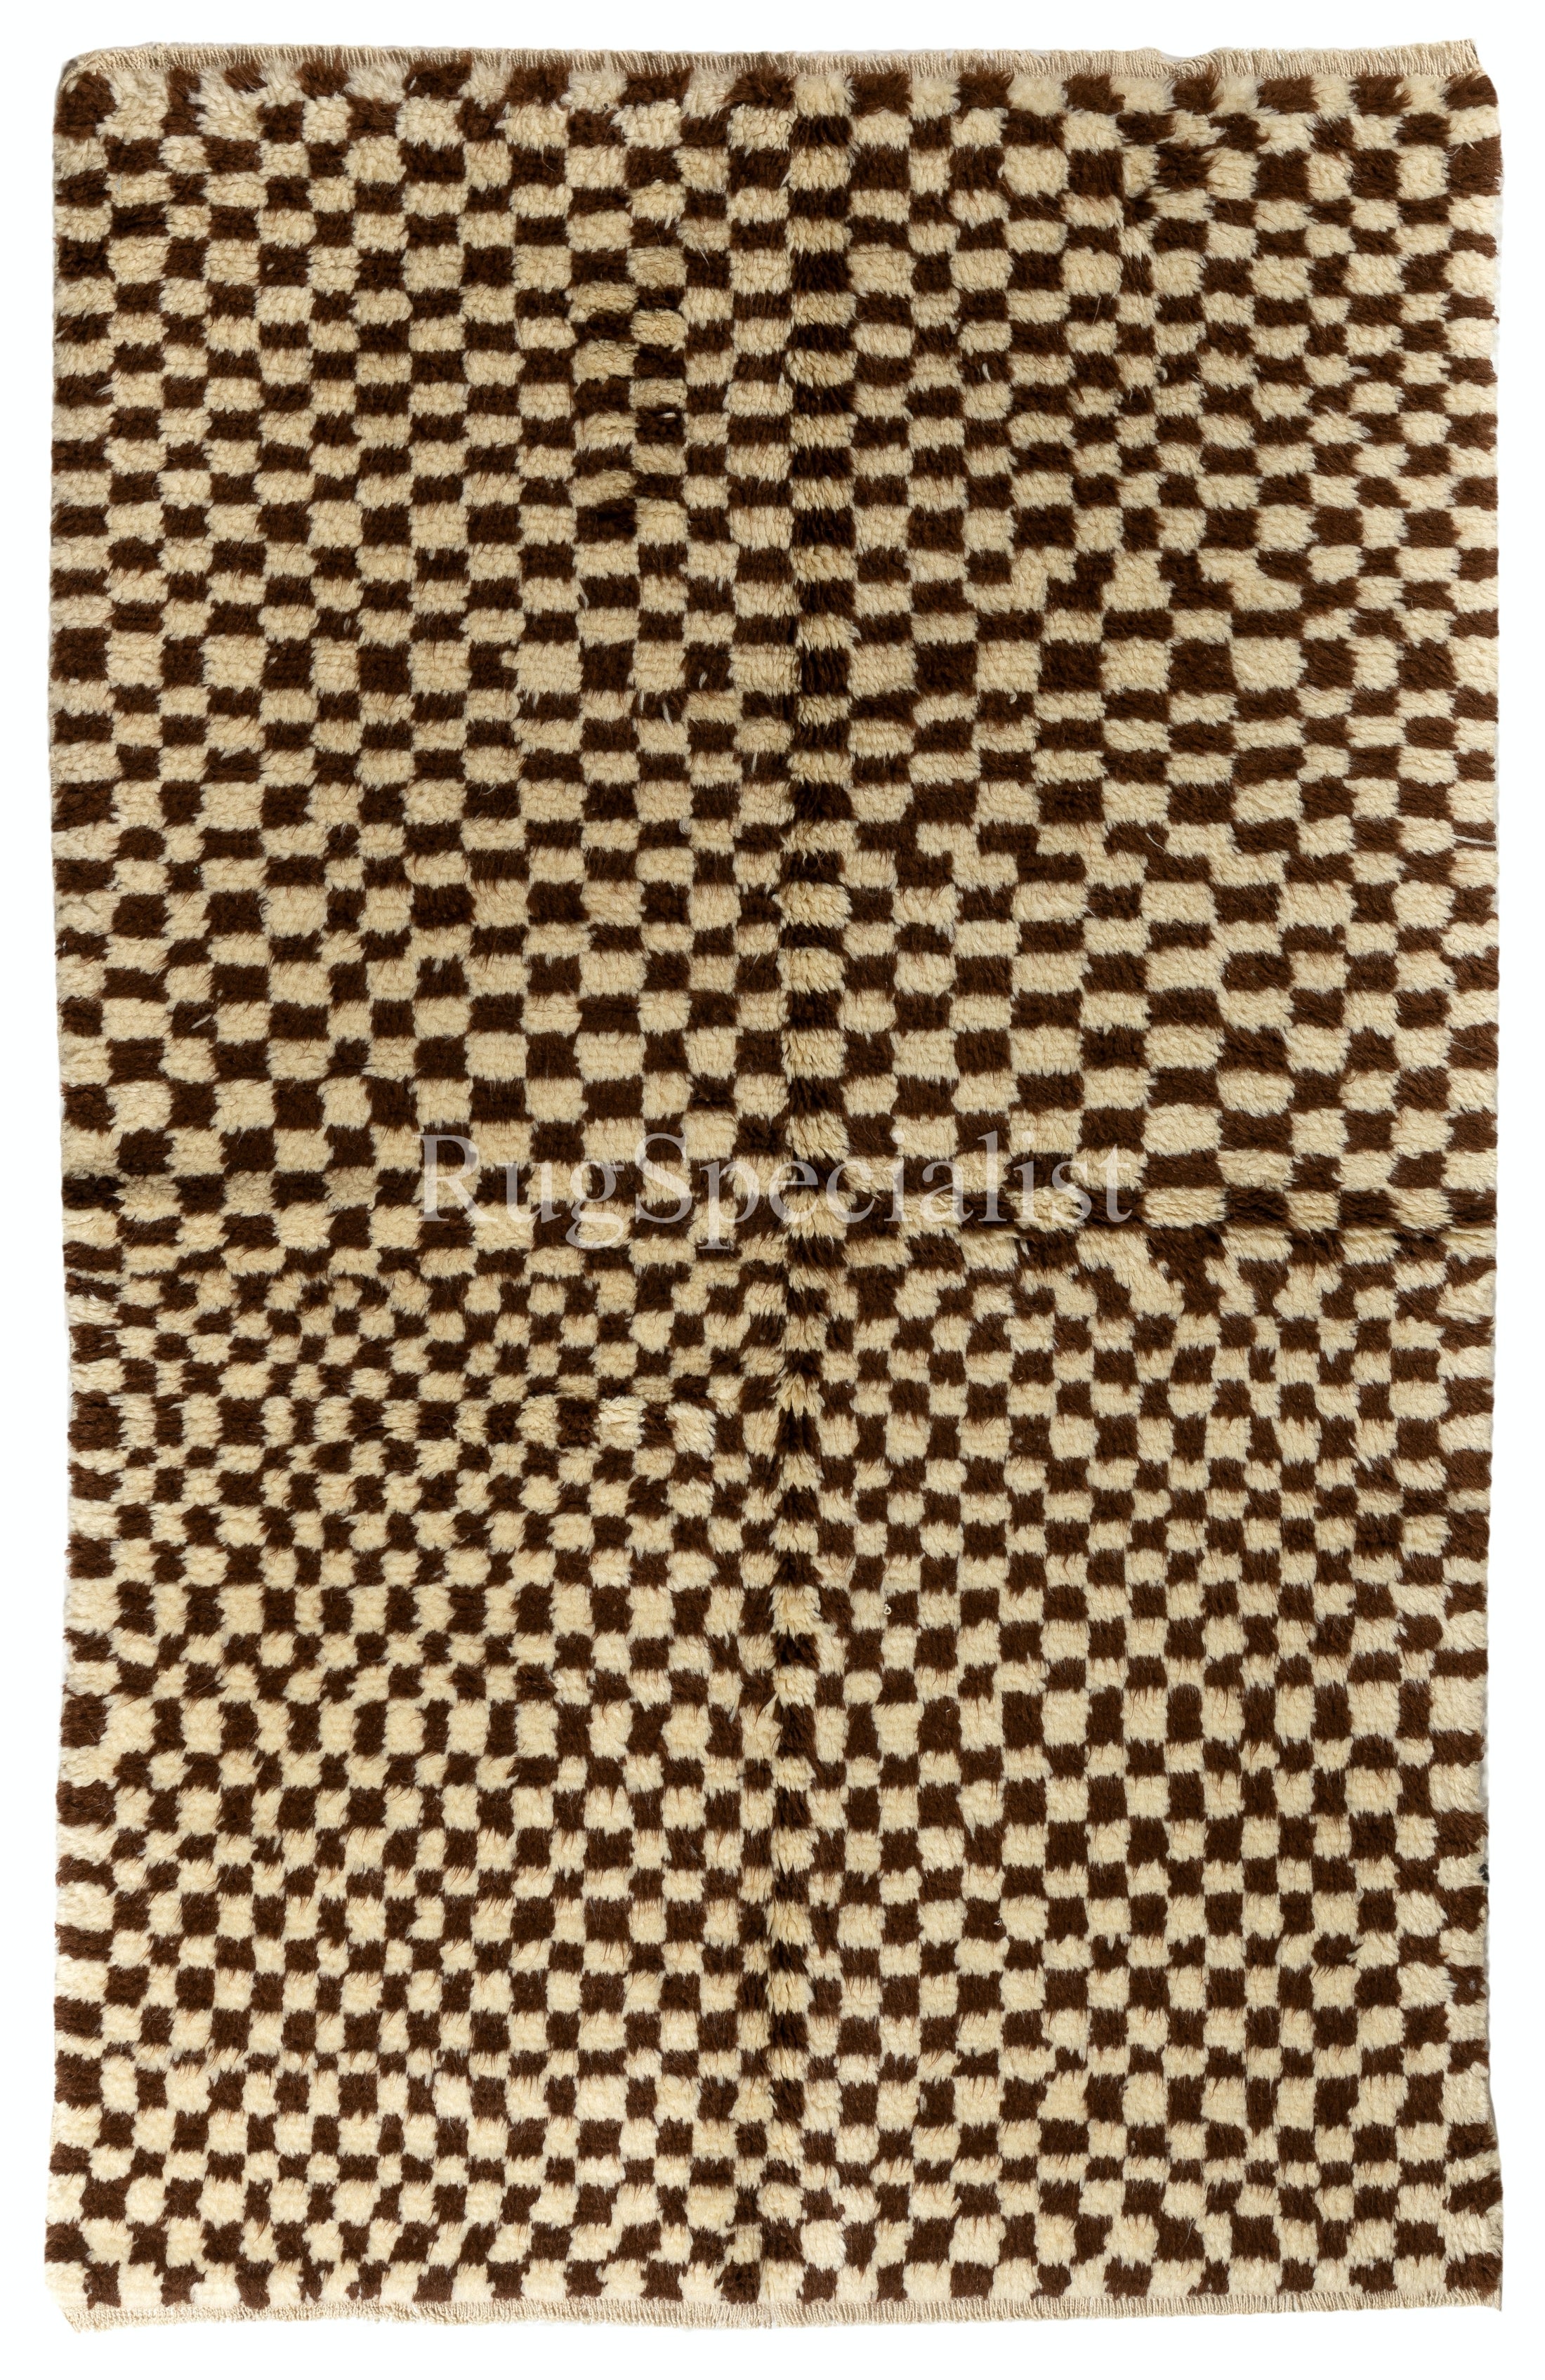  5x7 Ft Modern Checkered Hand-Knotted Tulu Rug, 100% Wolle, Creme und Brown Color